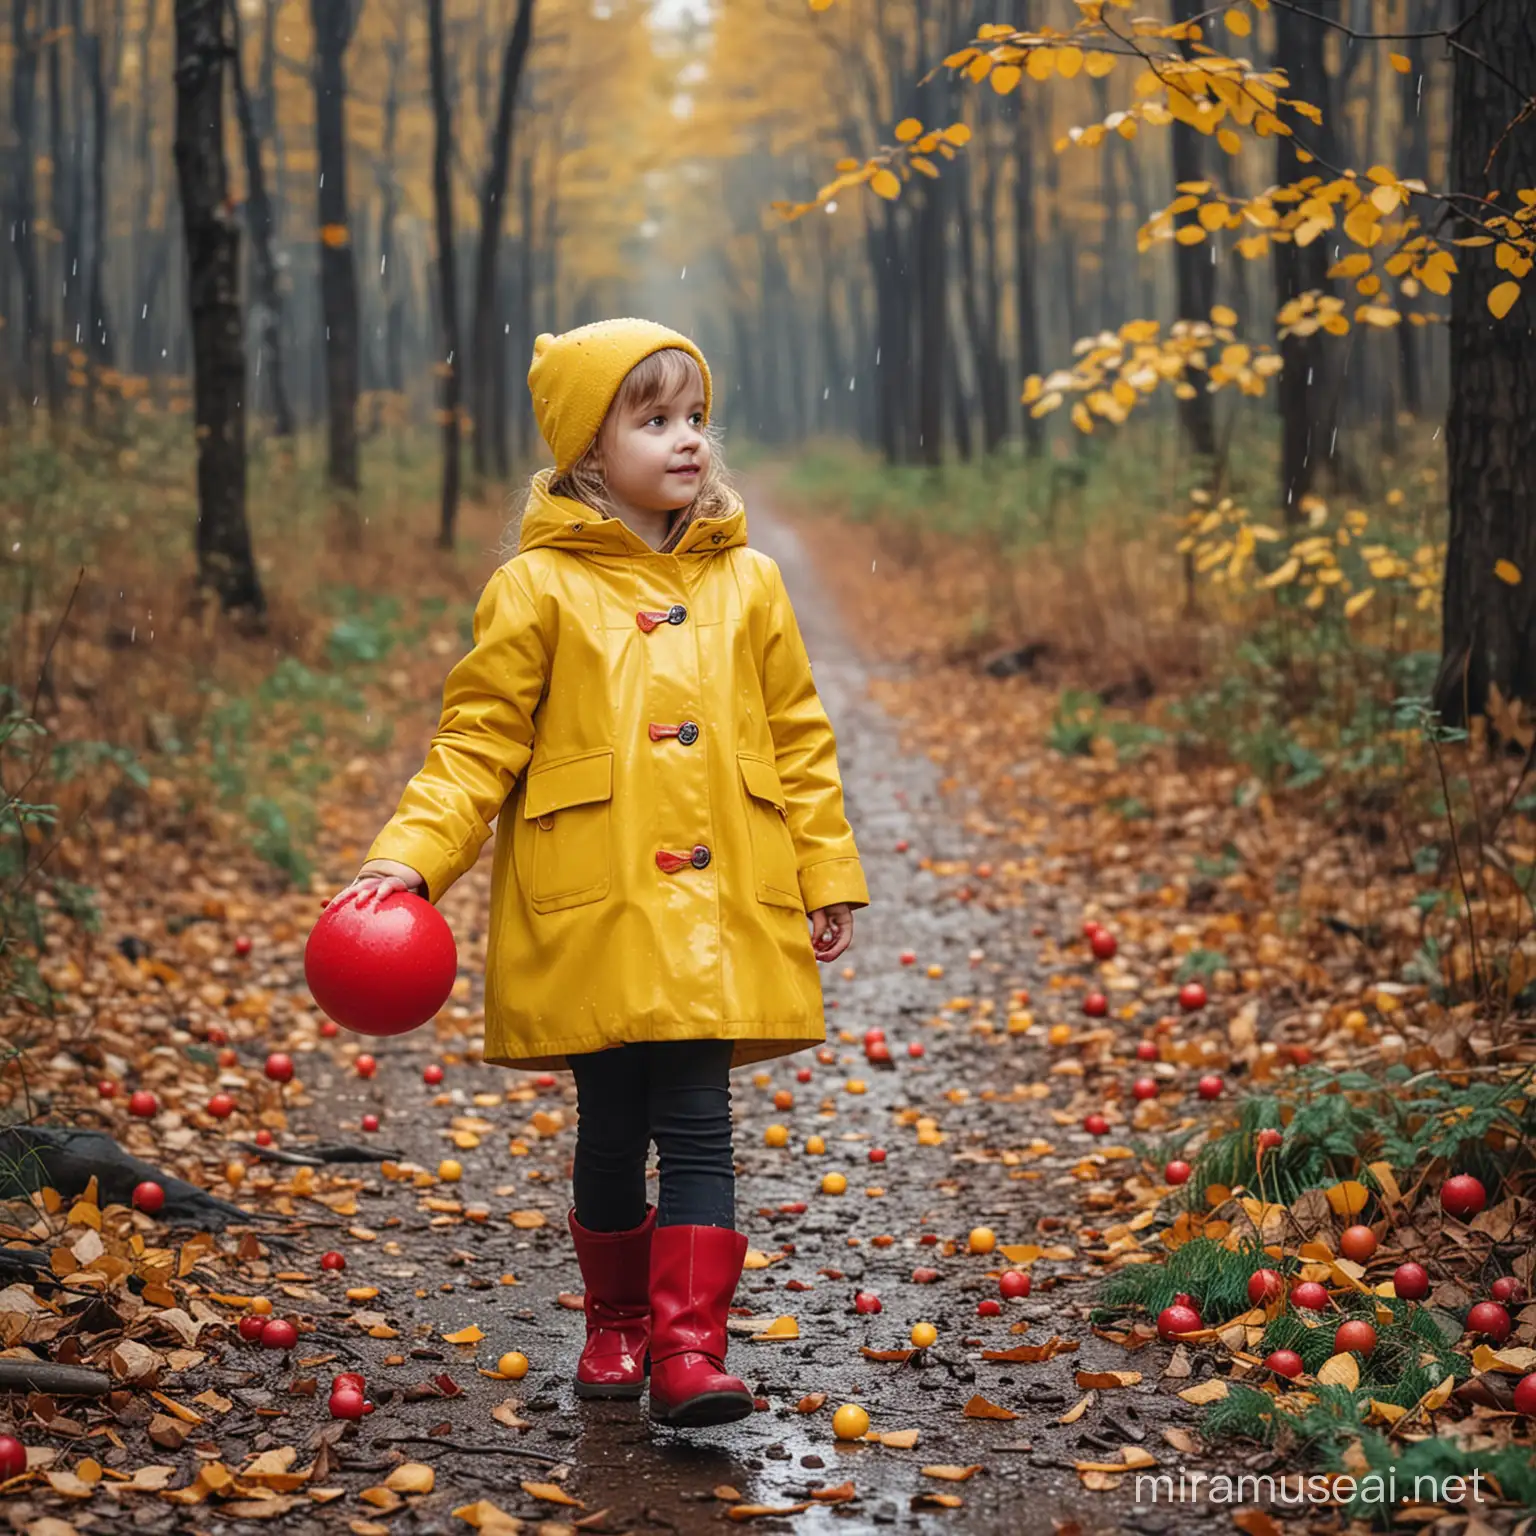 Autumn Forest Rain Little Girl in Yellow Coat with Red Ball